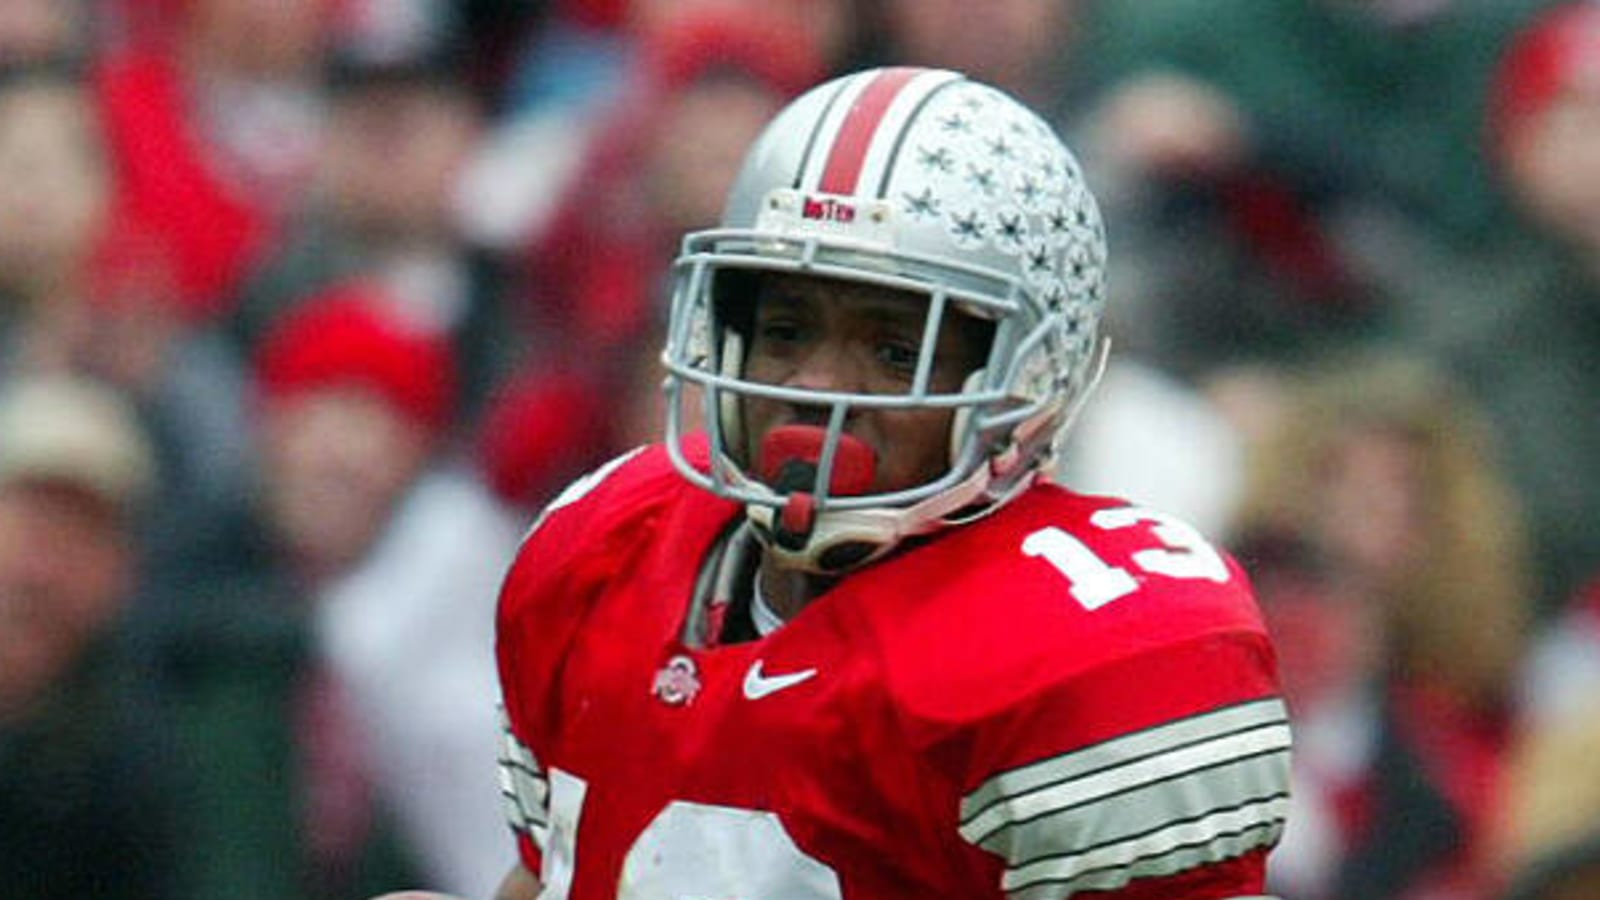 Maurice Clarett voices complaint with Ohio State football